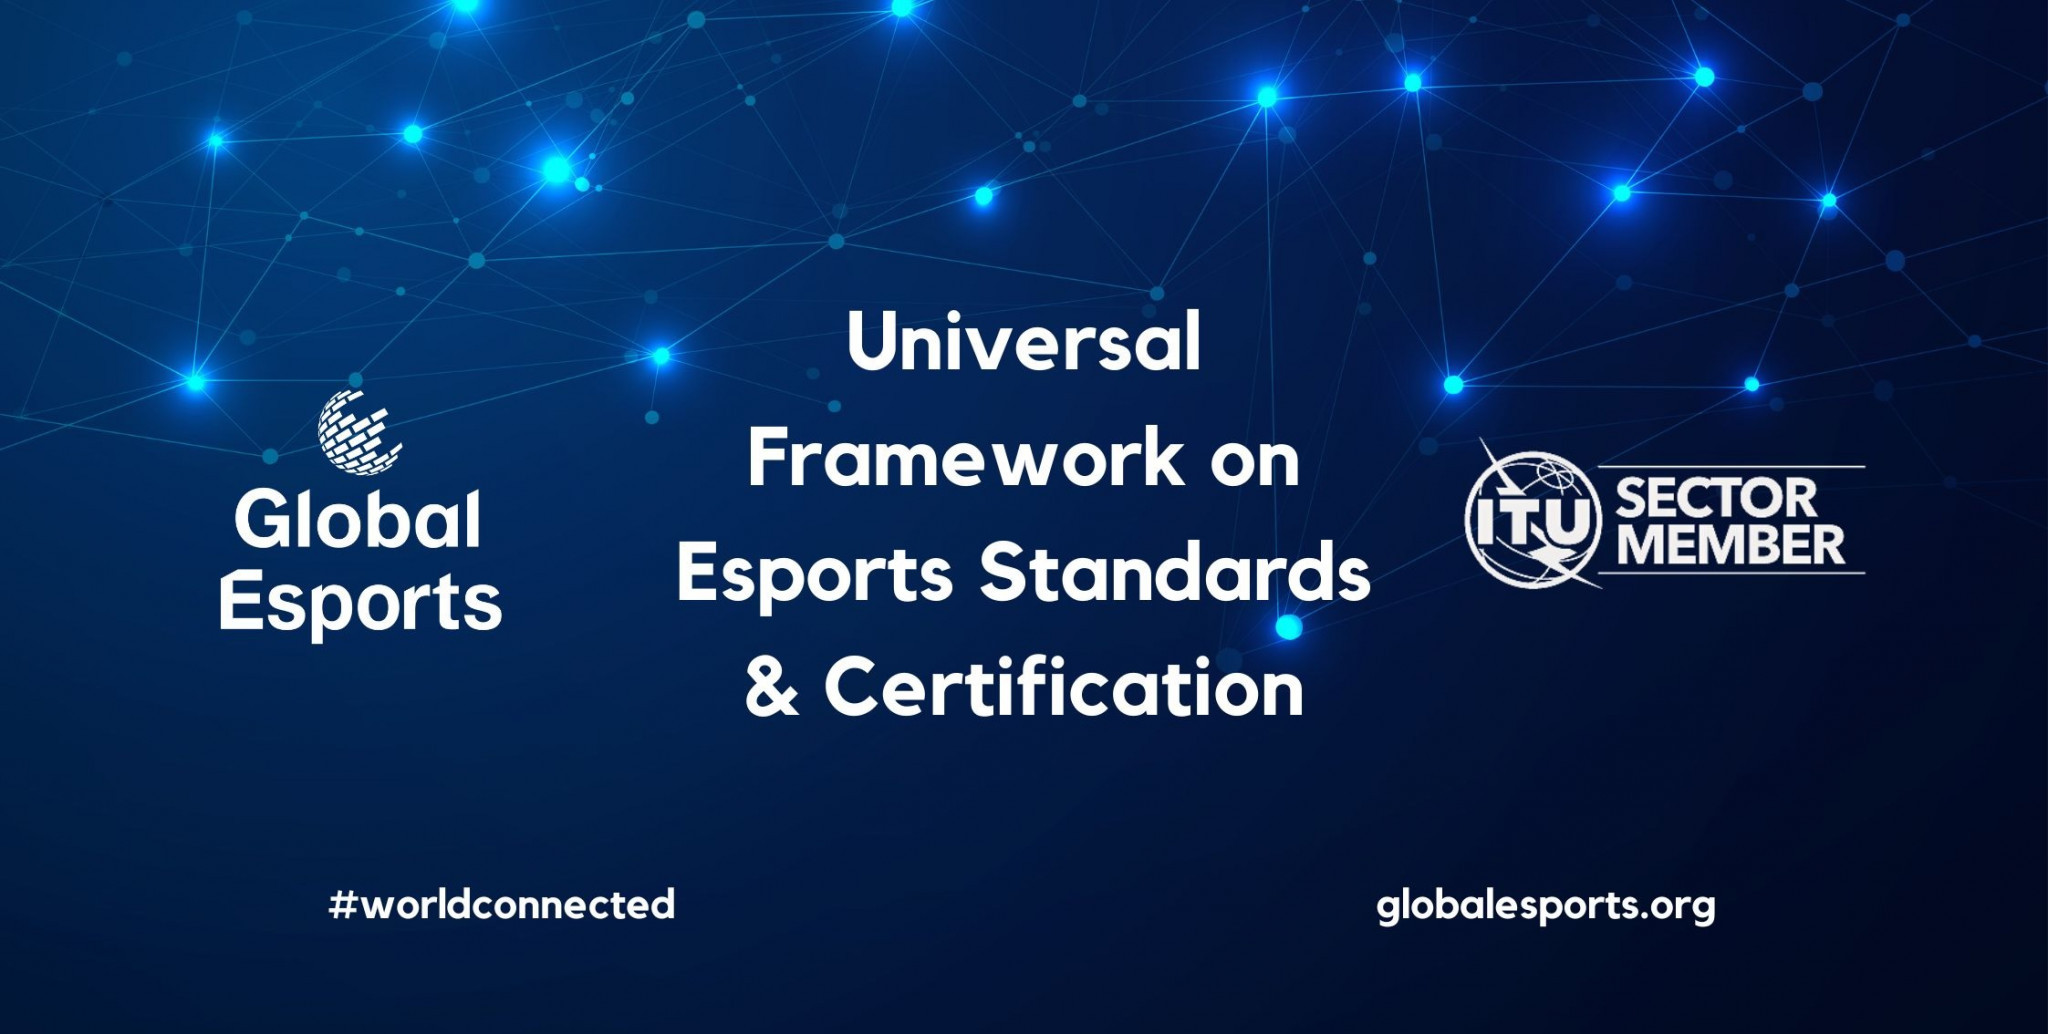 The Global Esports Federation is aiming to establish the Universal Framework on Esports Standards and Certification ©GEF